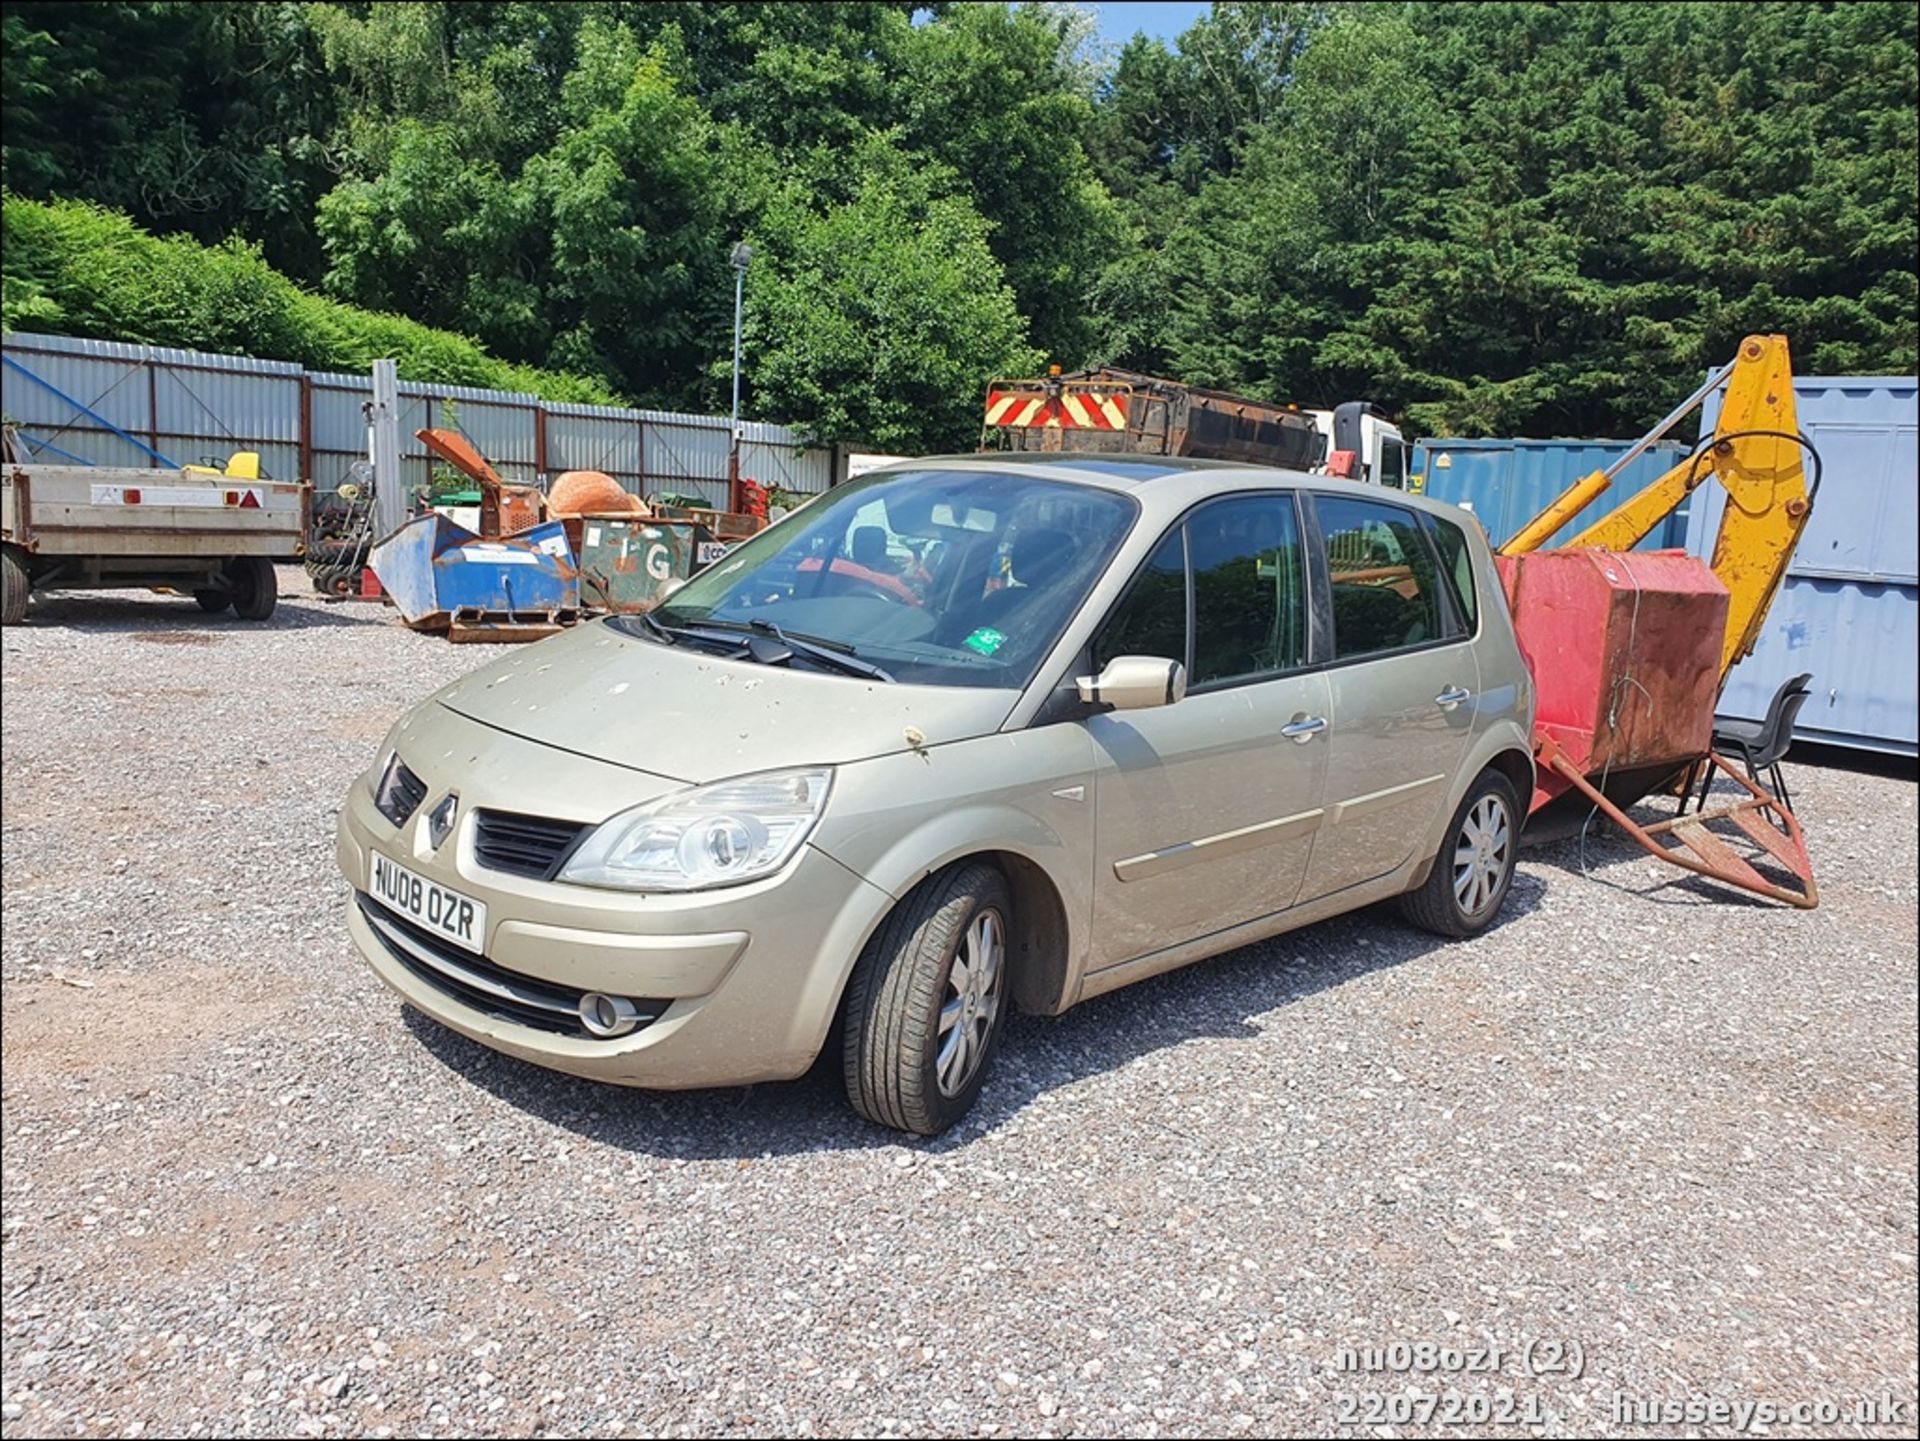 08/08 RENAULT SCENIC DYN DCI 106 - 1461cc 5dr MPV (Gold) - Image 3 of 16